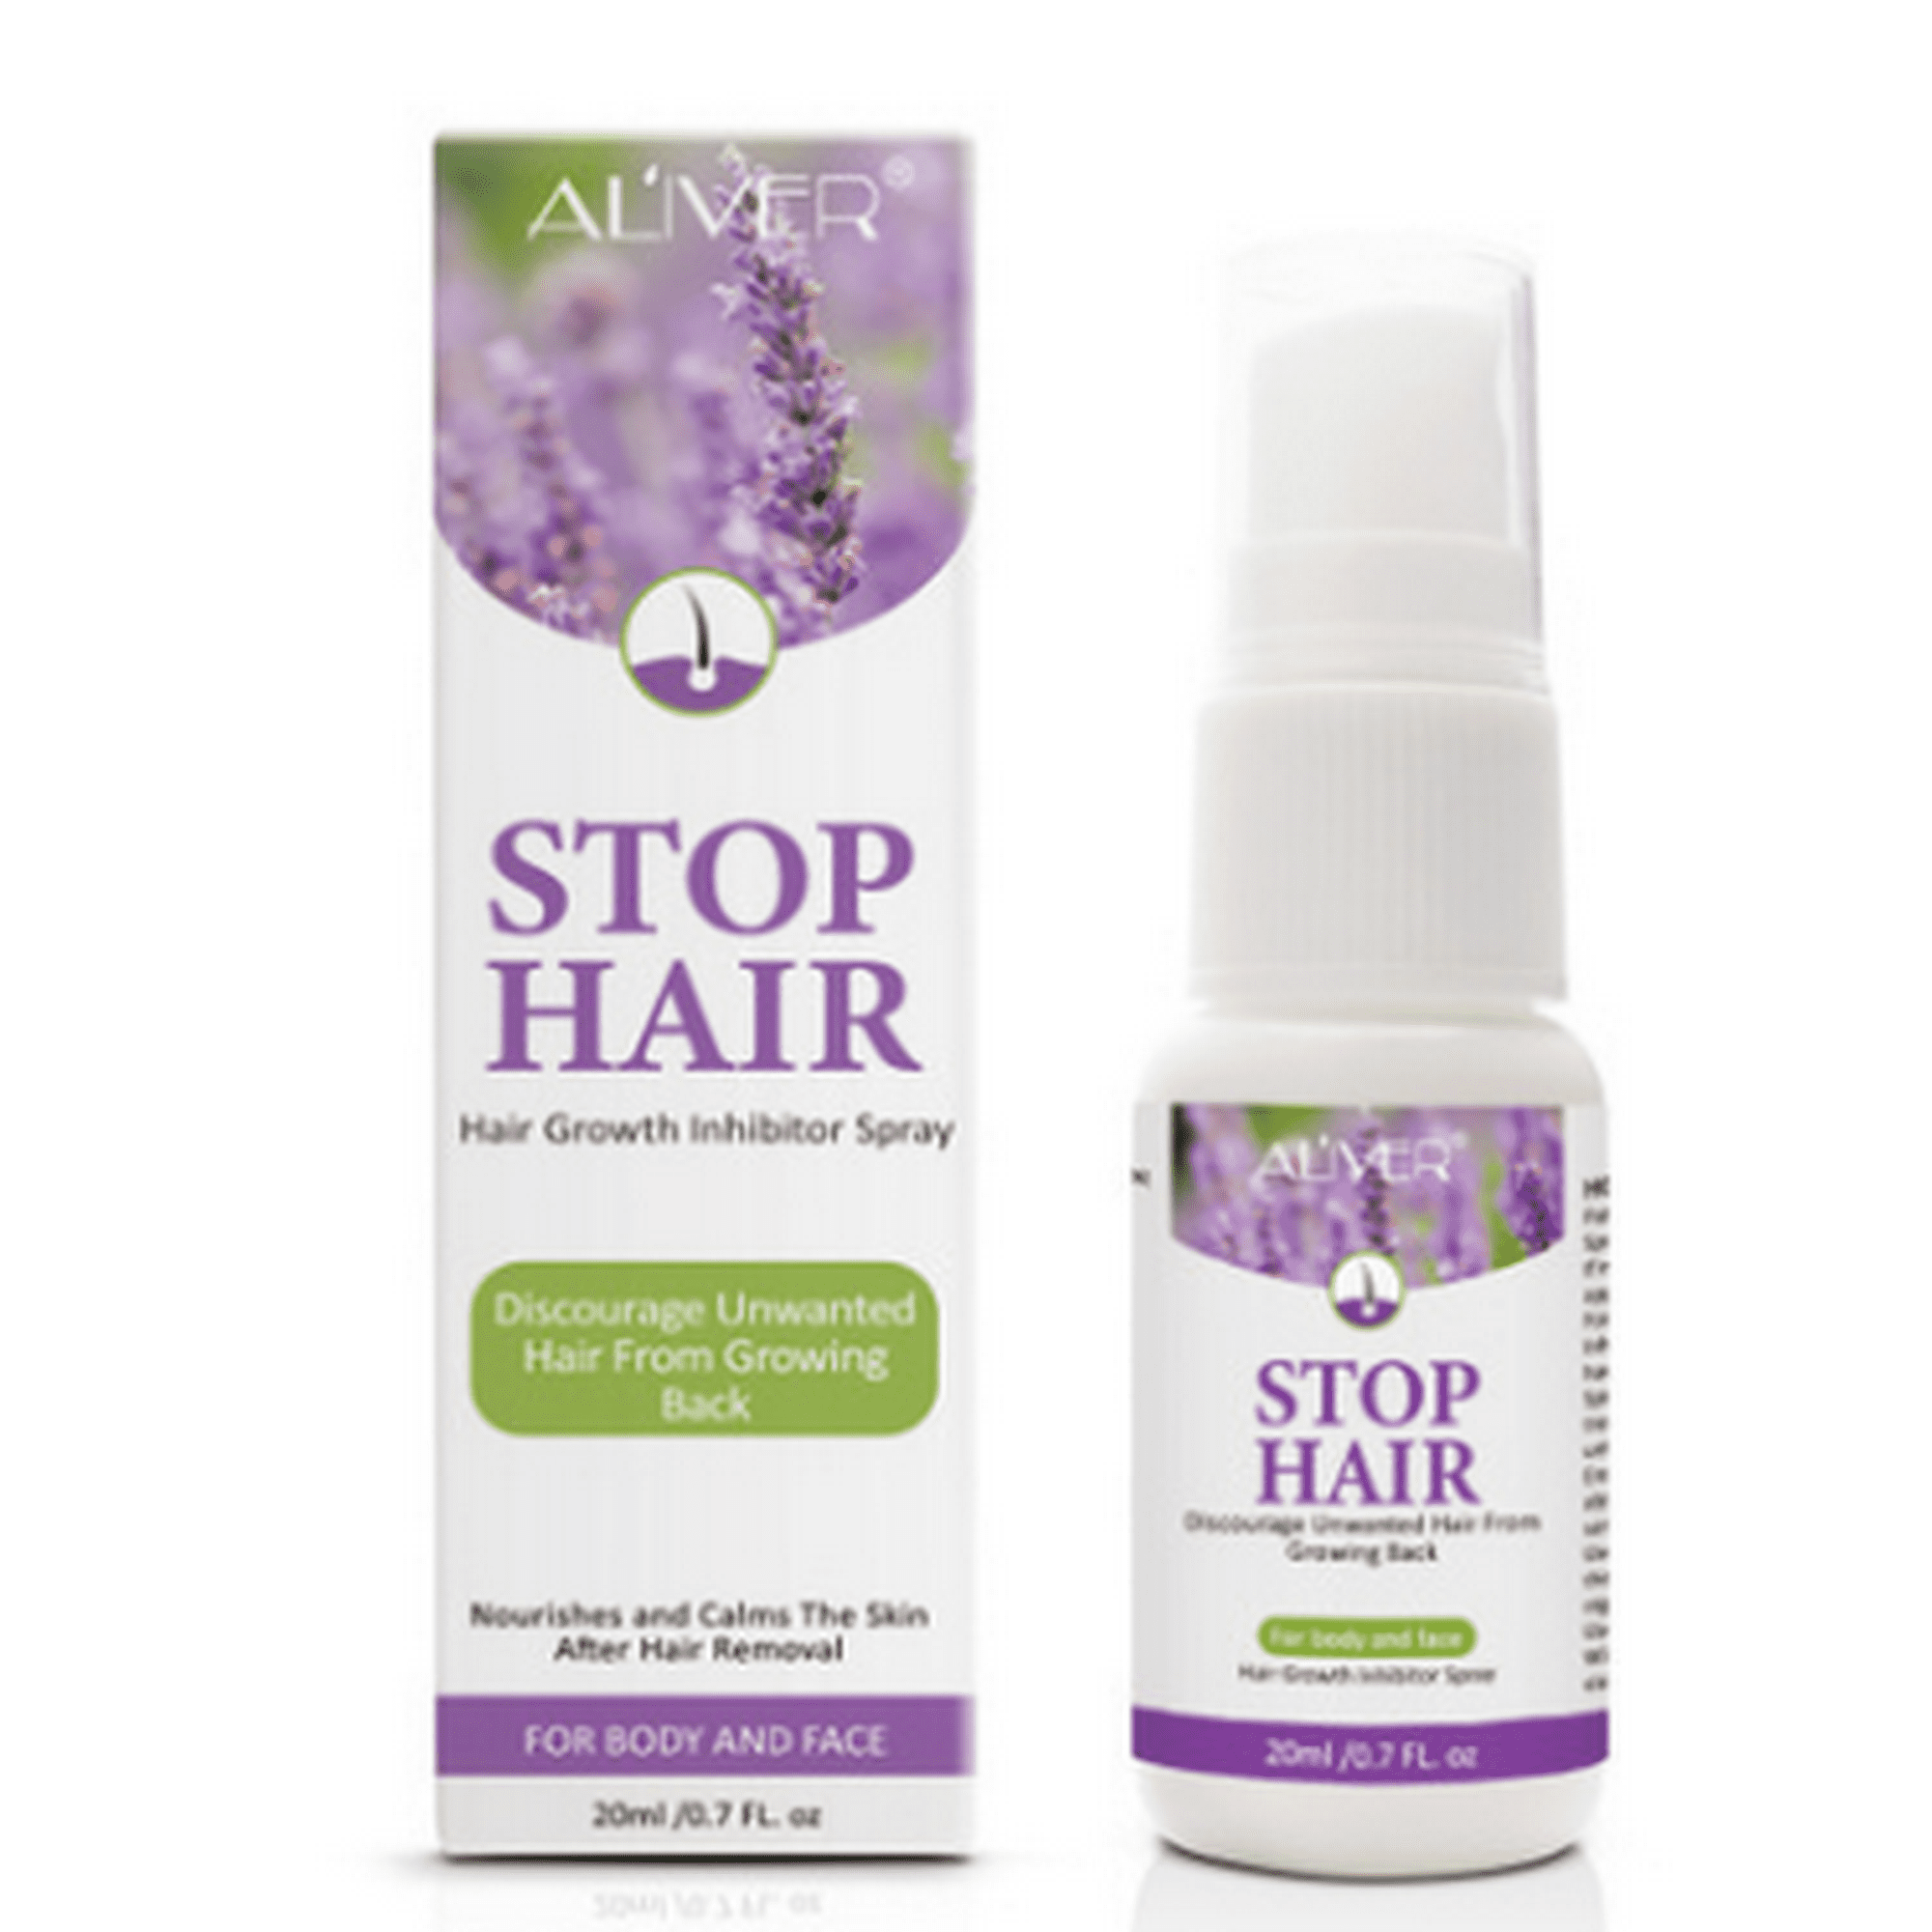 20ml Natural Permanent Hair Growth Inhibitor Hair Removal Suppression Spray Body Care Walmart Canada